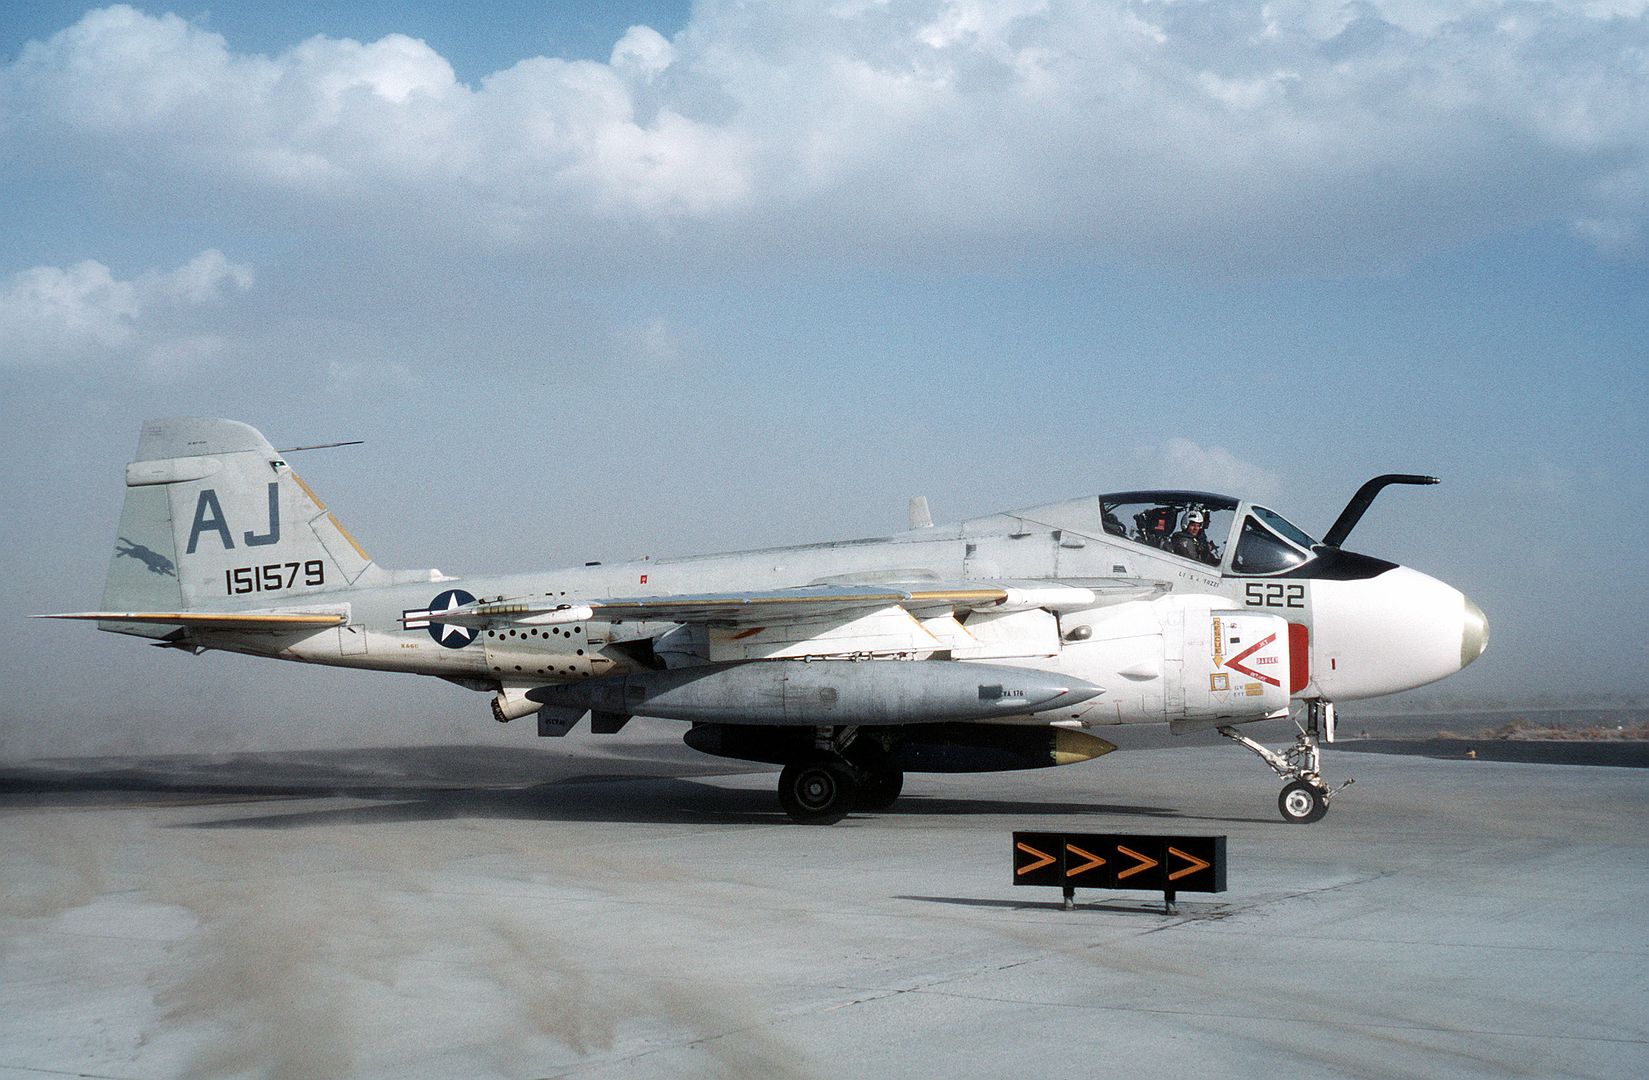 A Right Side View Of An Attack Squadron 176 KA 6D Intruder Aircraft Equipped For Refueling Operations Preparing For Takeoff